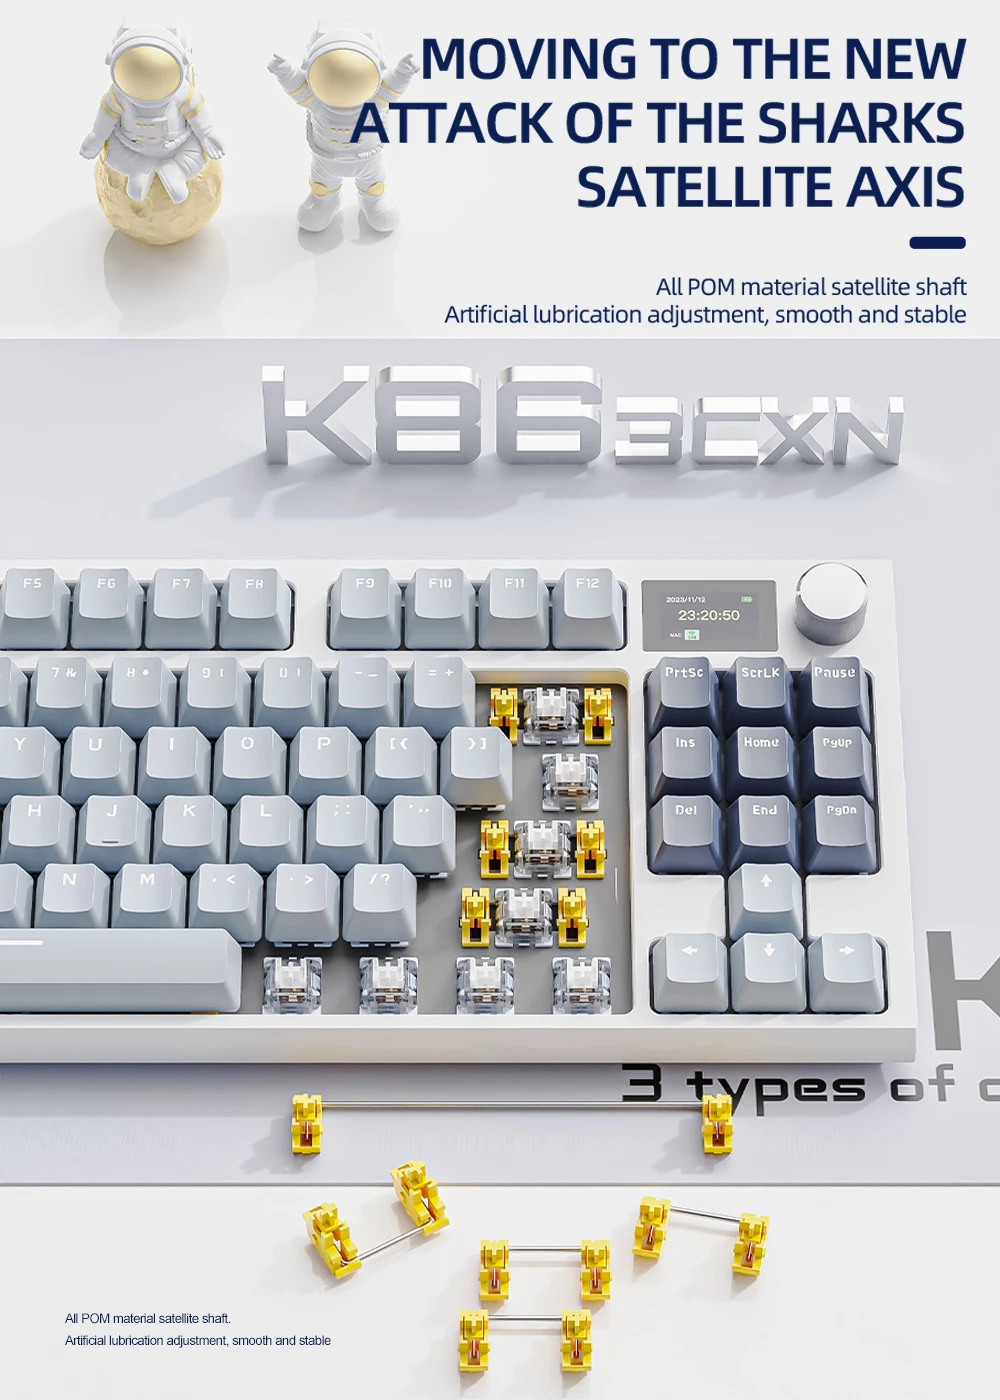 K86 Wireless Hot-Swappable Mechanical Keyboard Bluetooth/2.4g With Display Screen and Volume Rotary Button for Games and Work